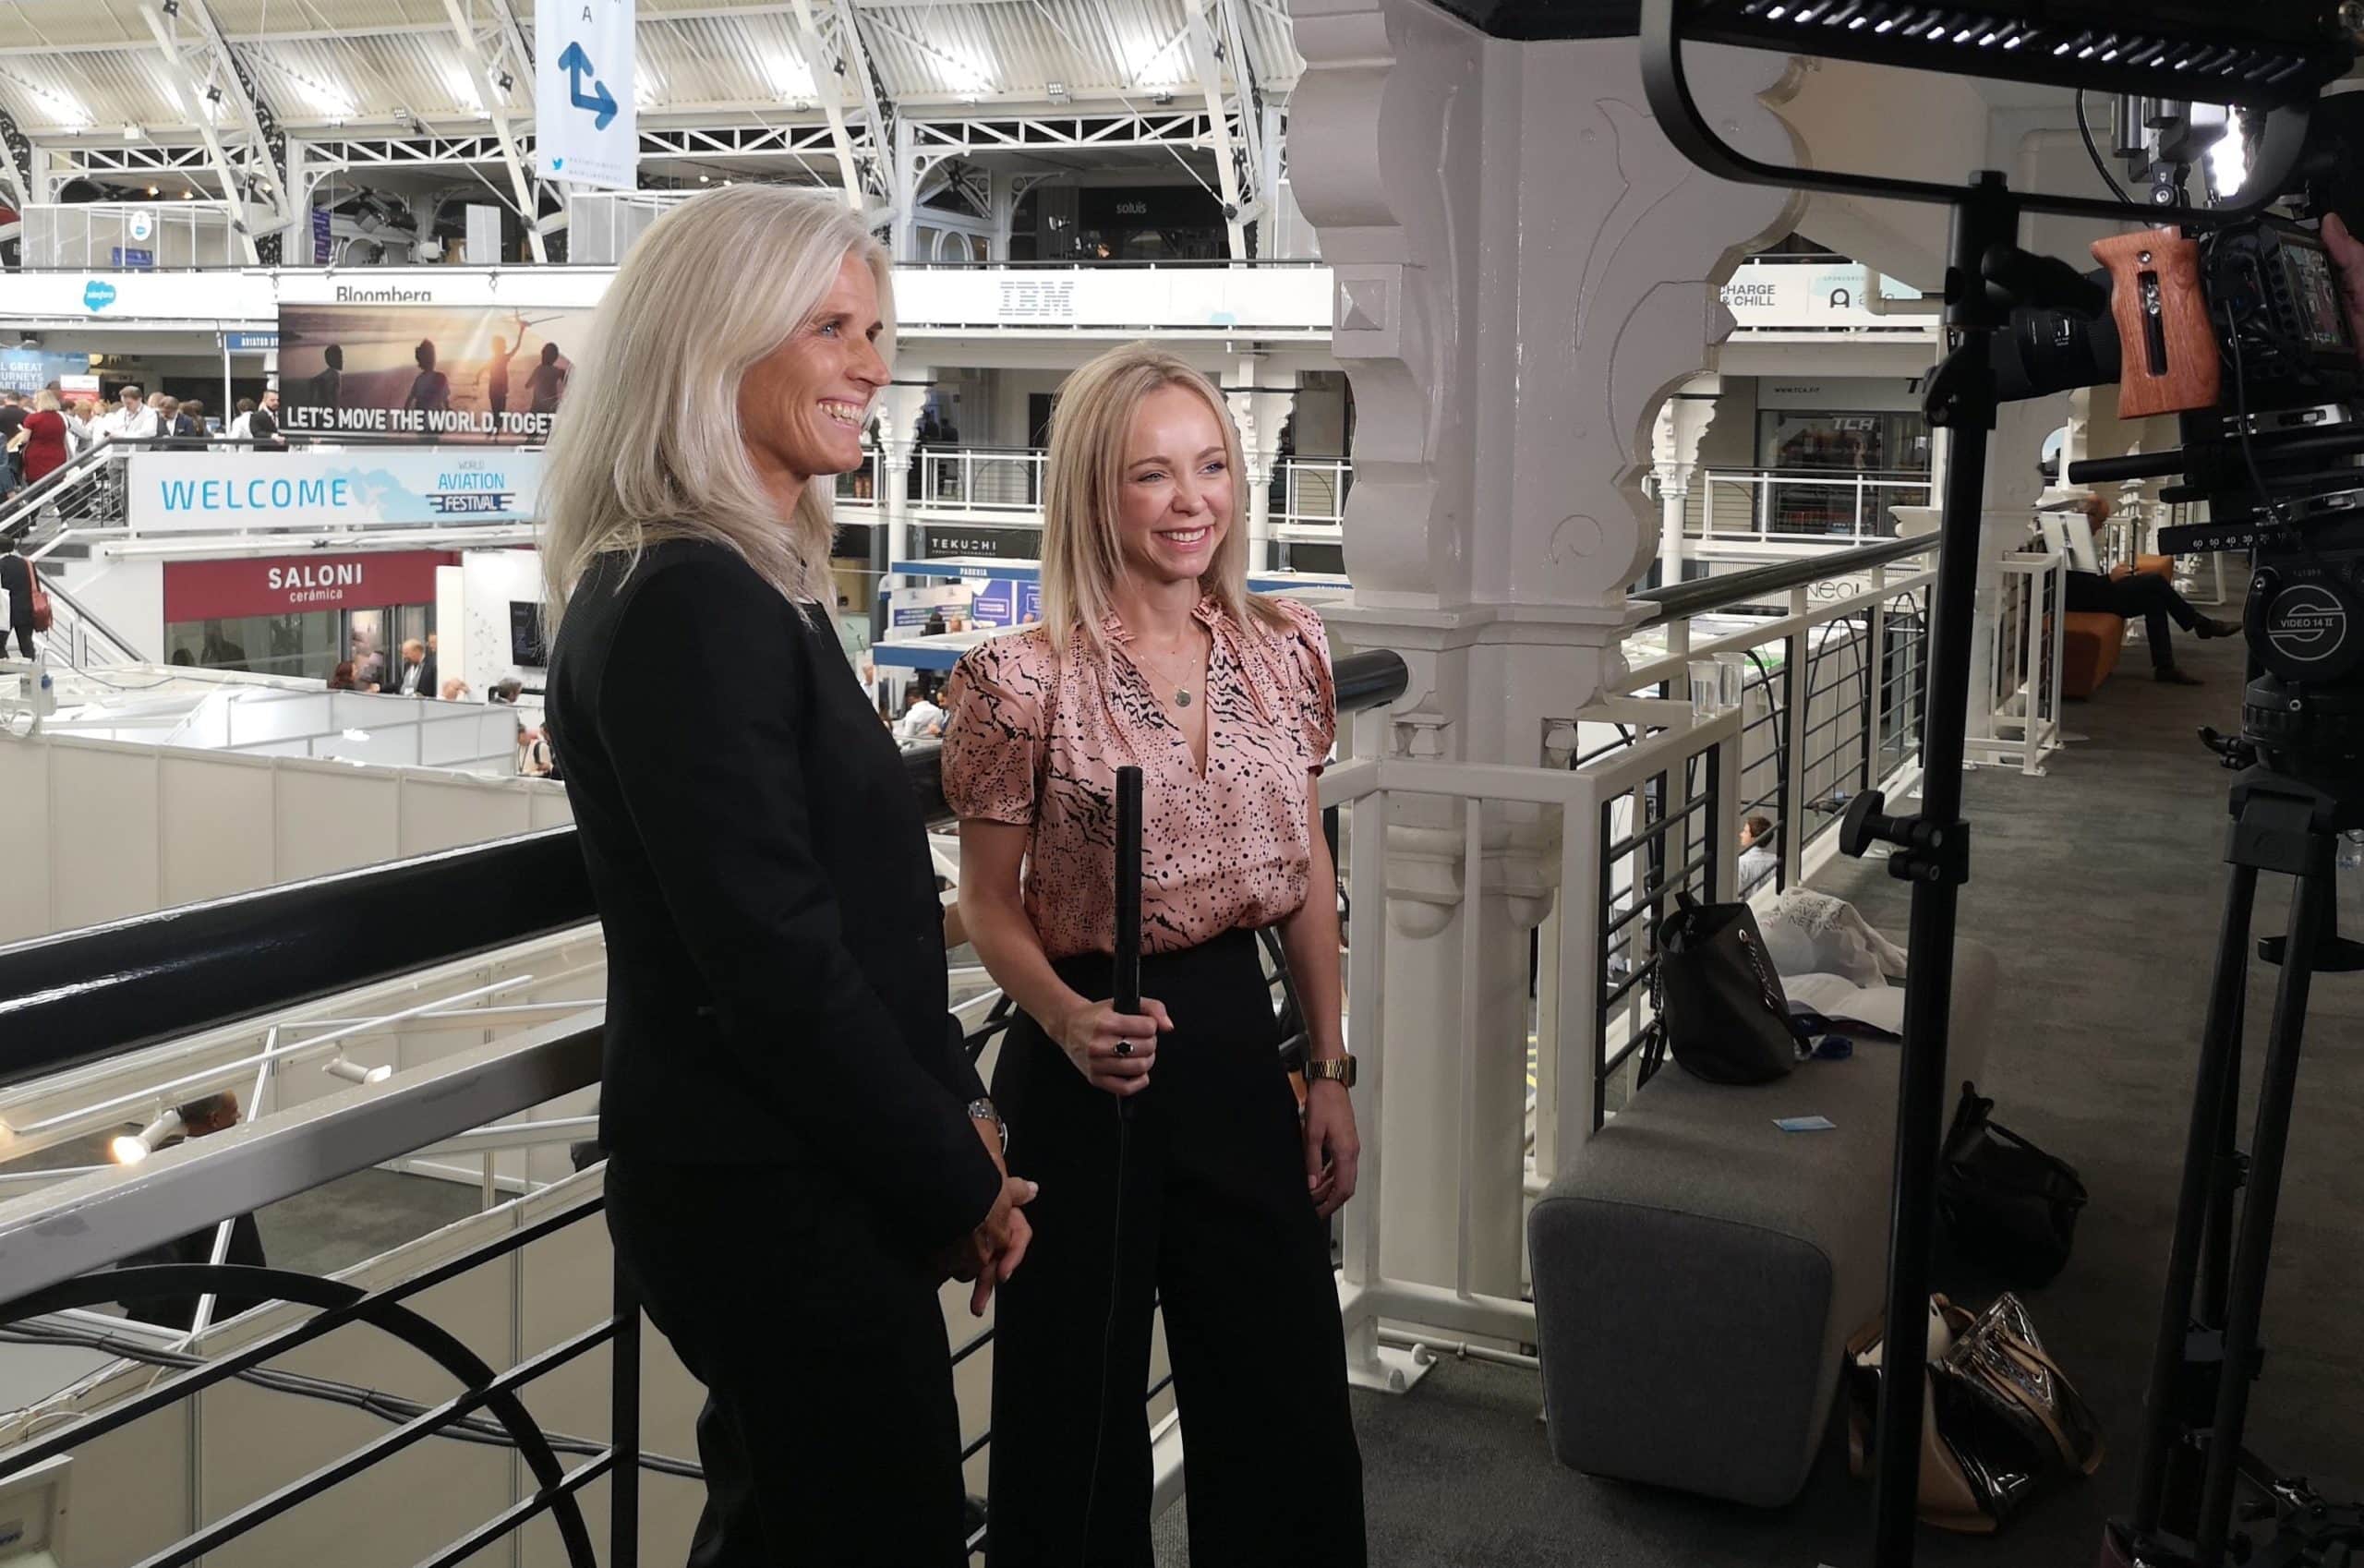 Pictured (left to right): Annelie Nassen, EVP Global Sales and Marketing, Scandinavian Airlines and Maryann Simson, director, APEX Media.